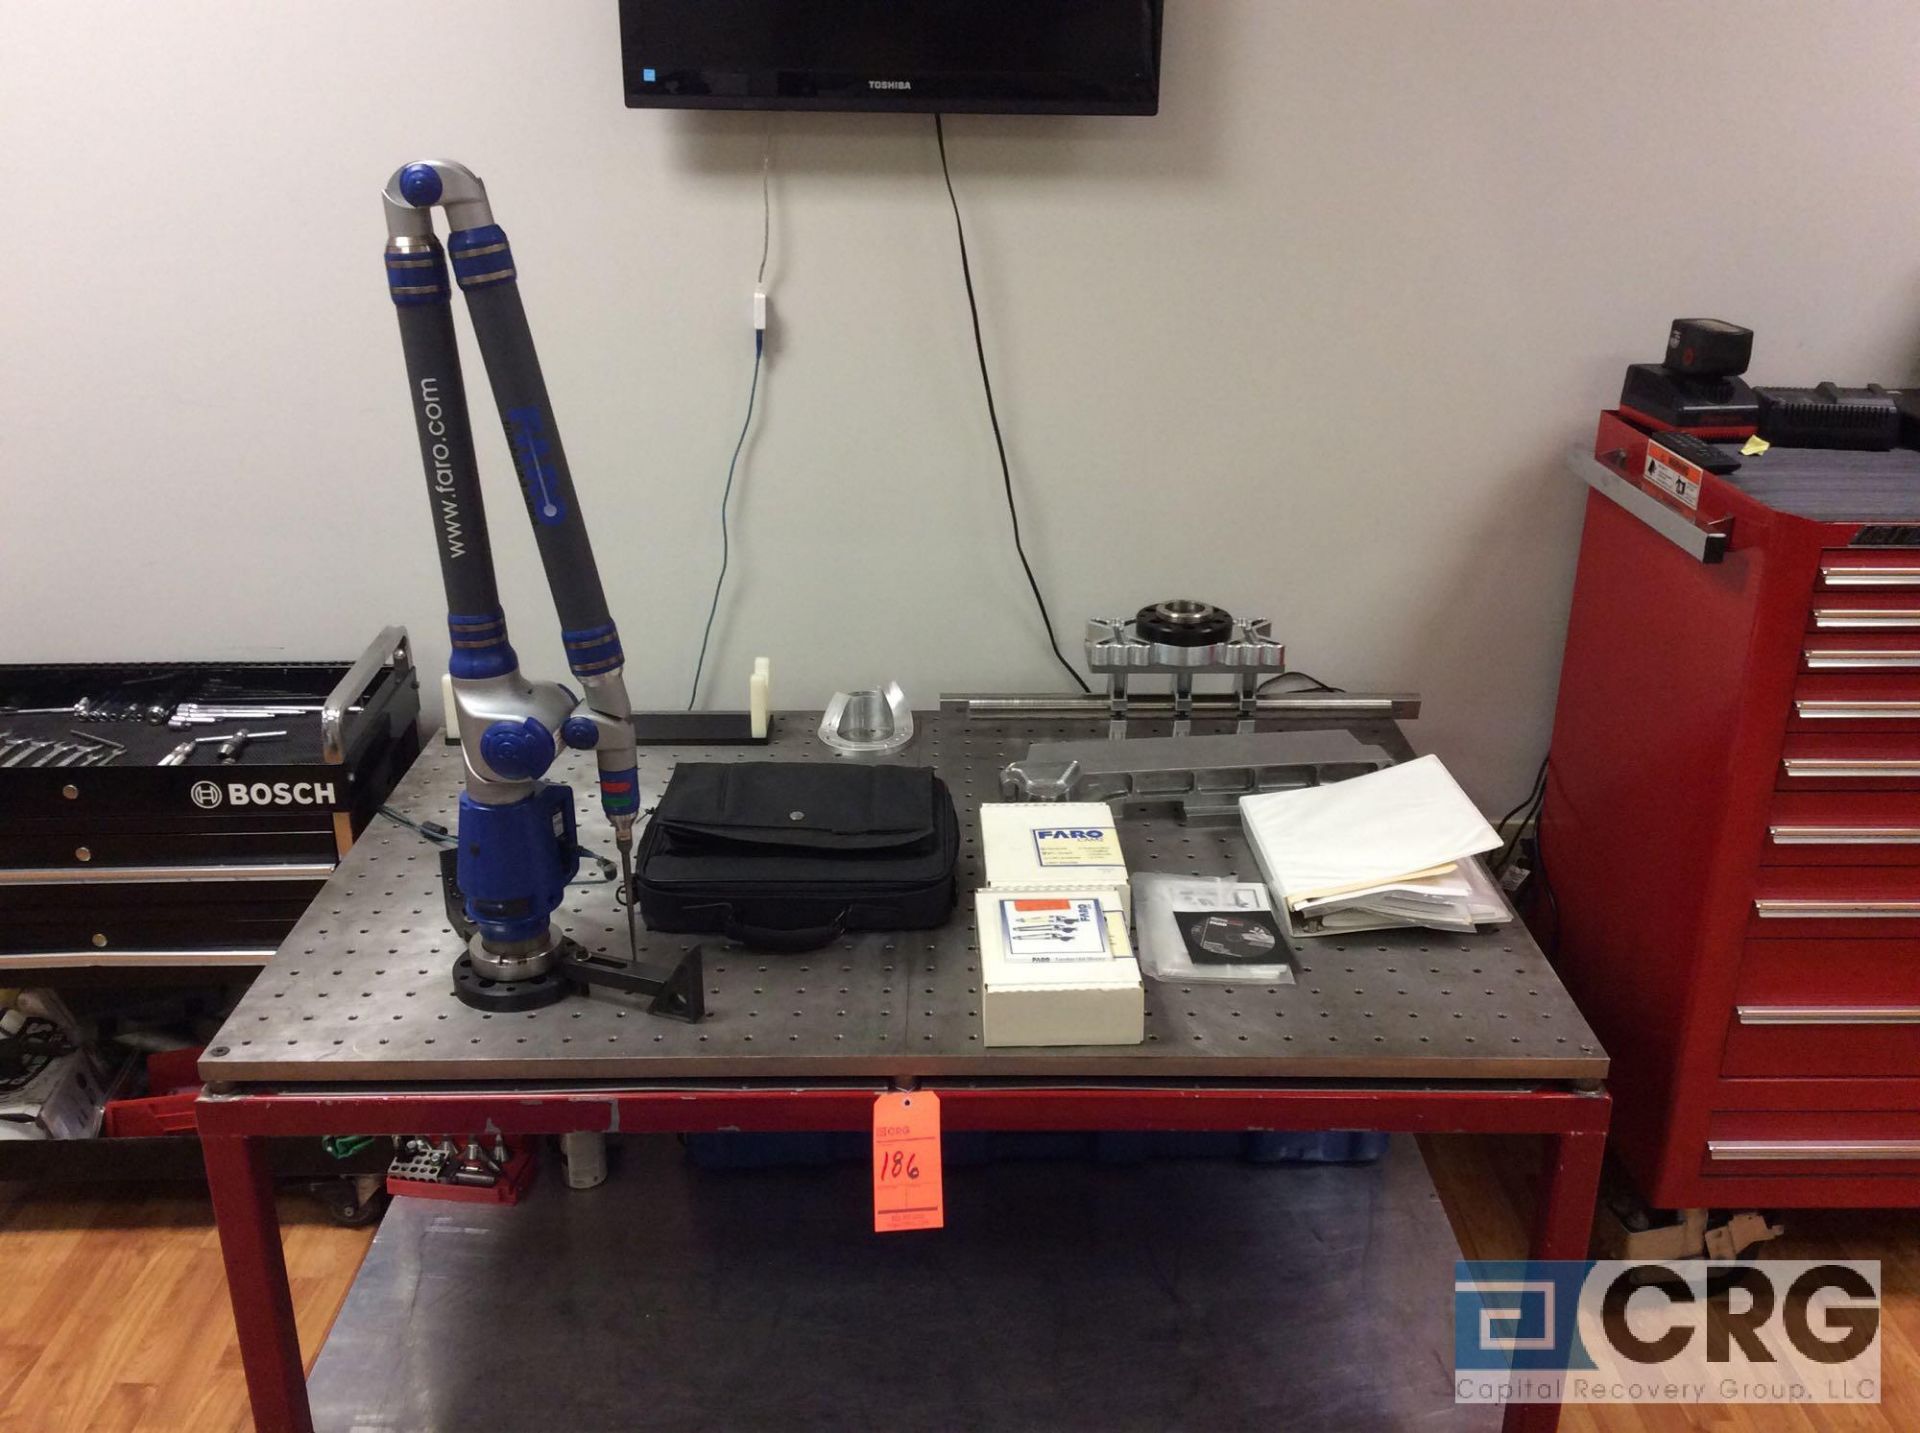 2006 Faro Titanium Arm CMM scanning probe with case on set-up table with fixturing and software